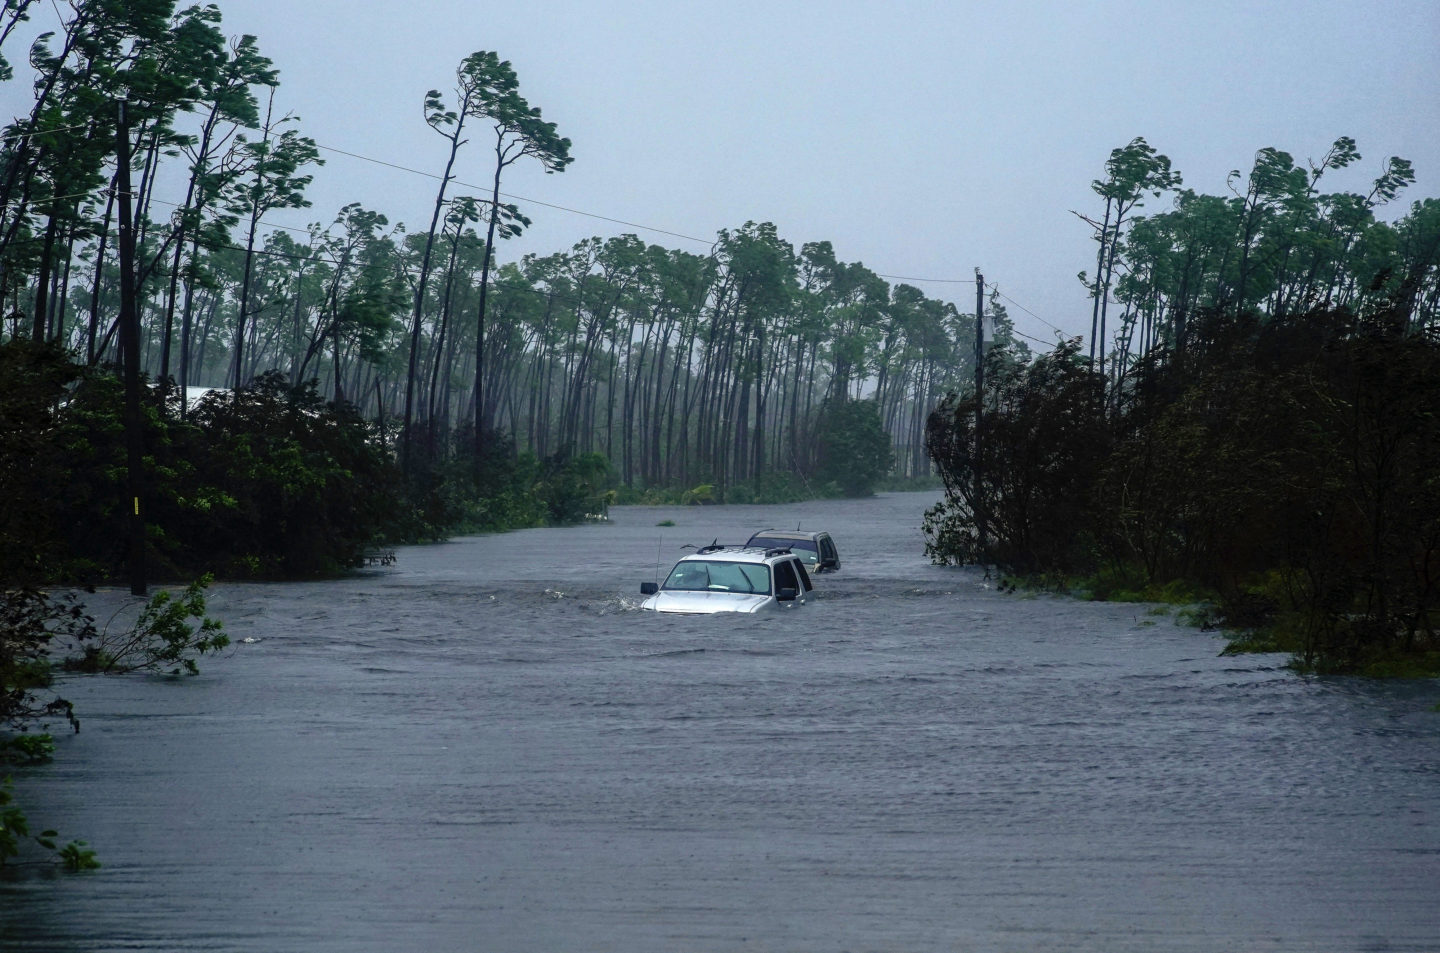 Cars sit submerged in water from Hurricane Dorian in Freeport, Bahamas, Tuesday, Sept. 3, 2019. (AP Photo/Ramon Espinosa)